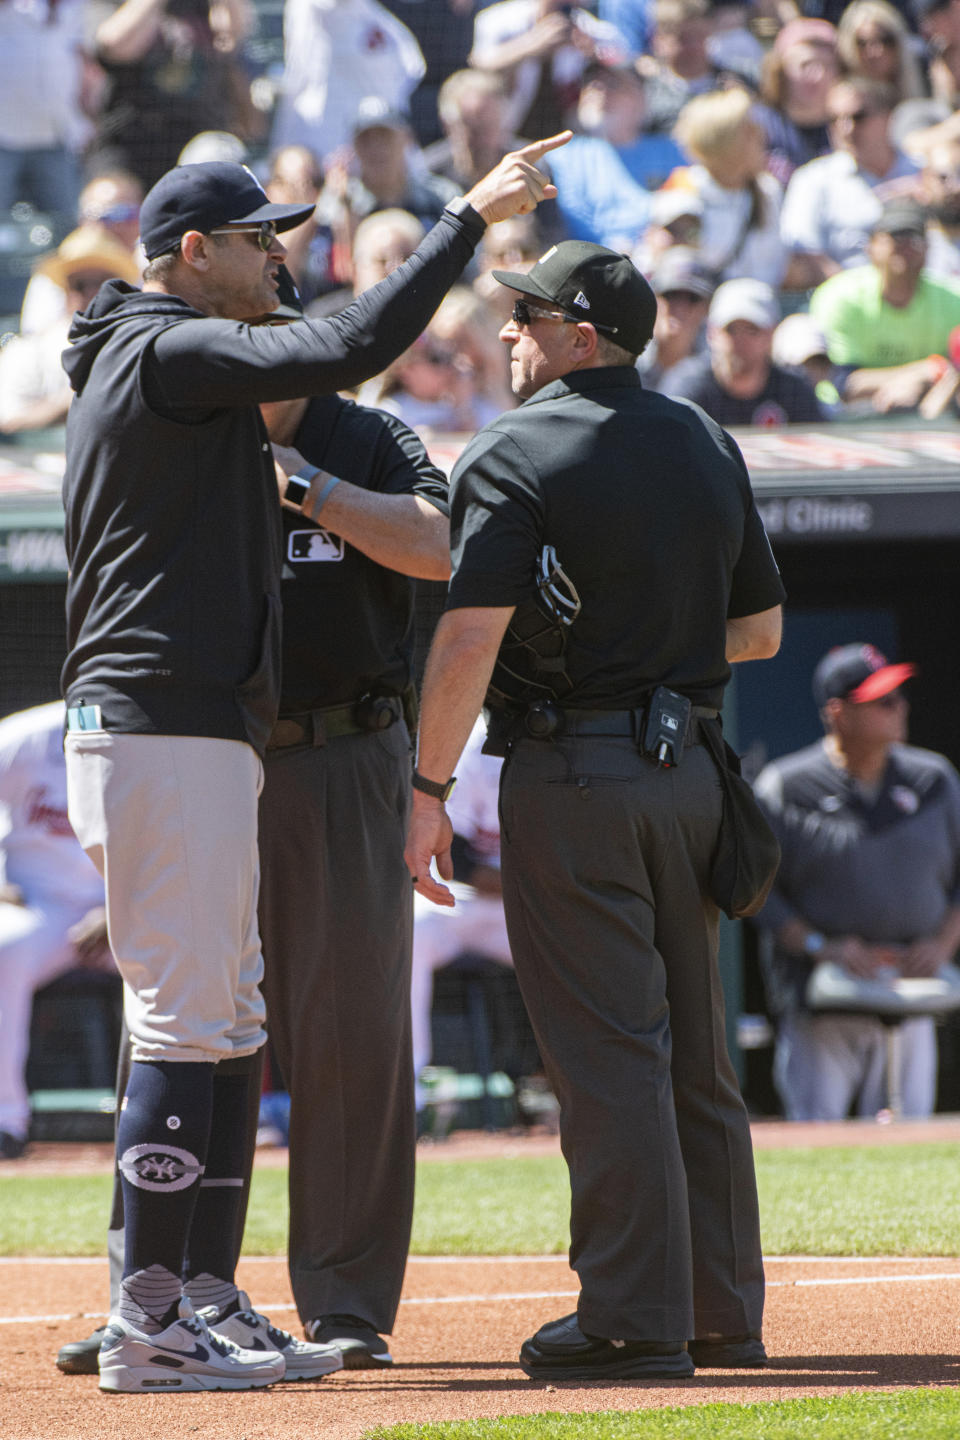 New York Yankees manager Aaron Boone argues a call with umpires during the first inning of a baseball game against the Cleveland Guardians in Cleveland, Wednesday April 12, 2023. Boone was ejected from the game. (AP Photo/Phil Long)